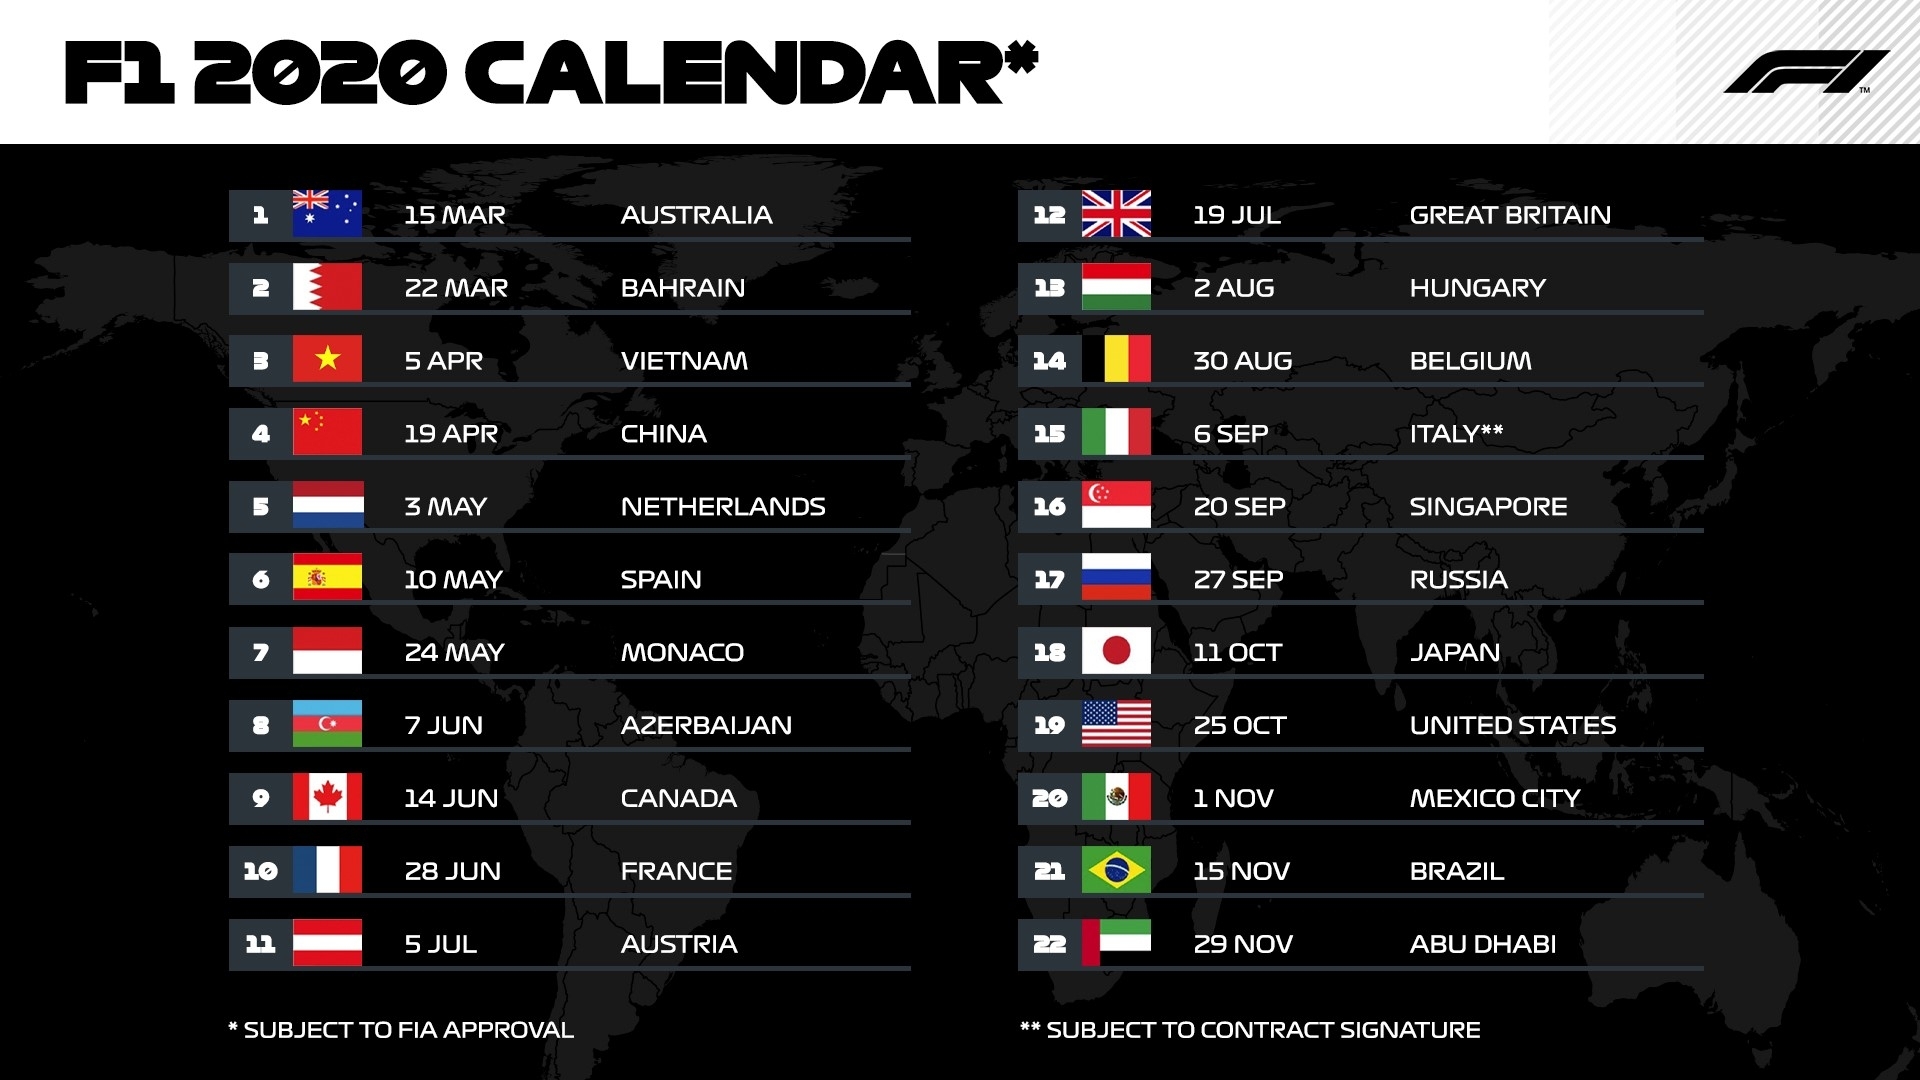 F1 Calendar 2020 - Enjoy A Record-Breaking 22 Races In The